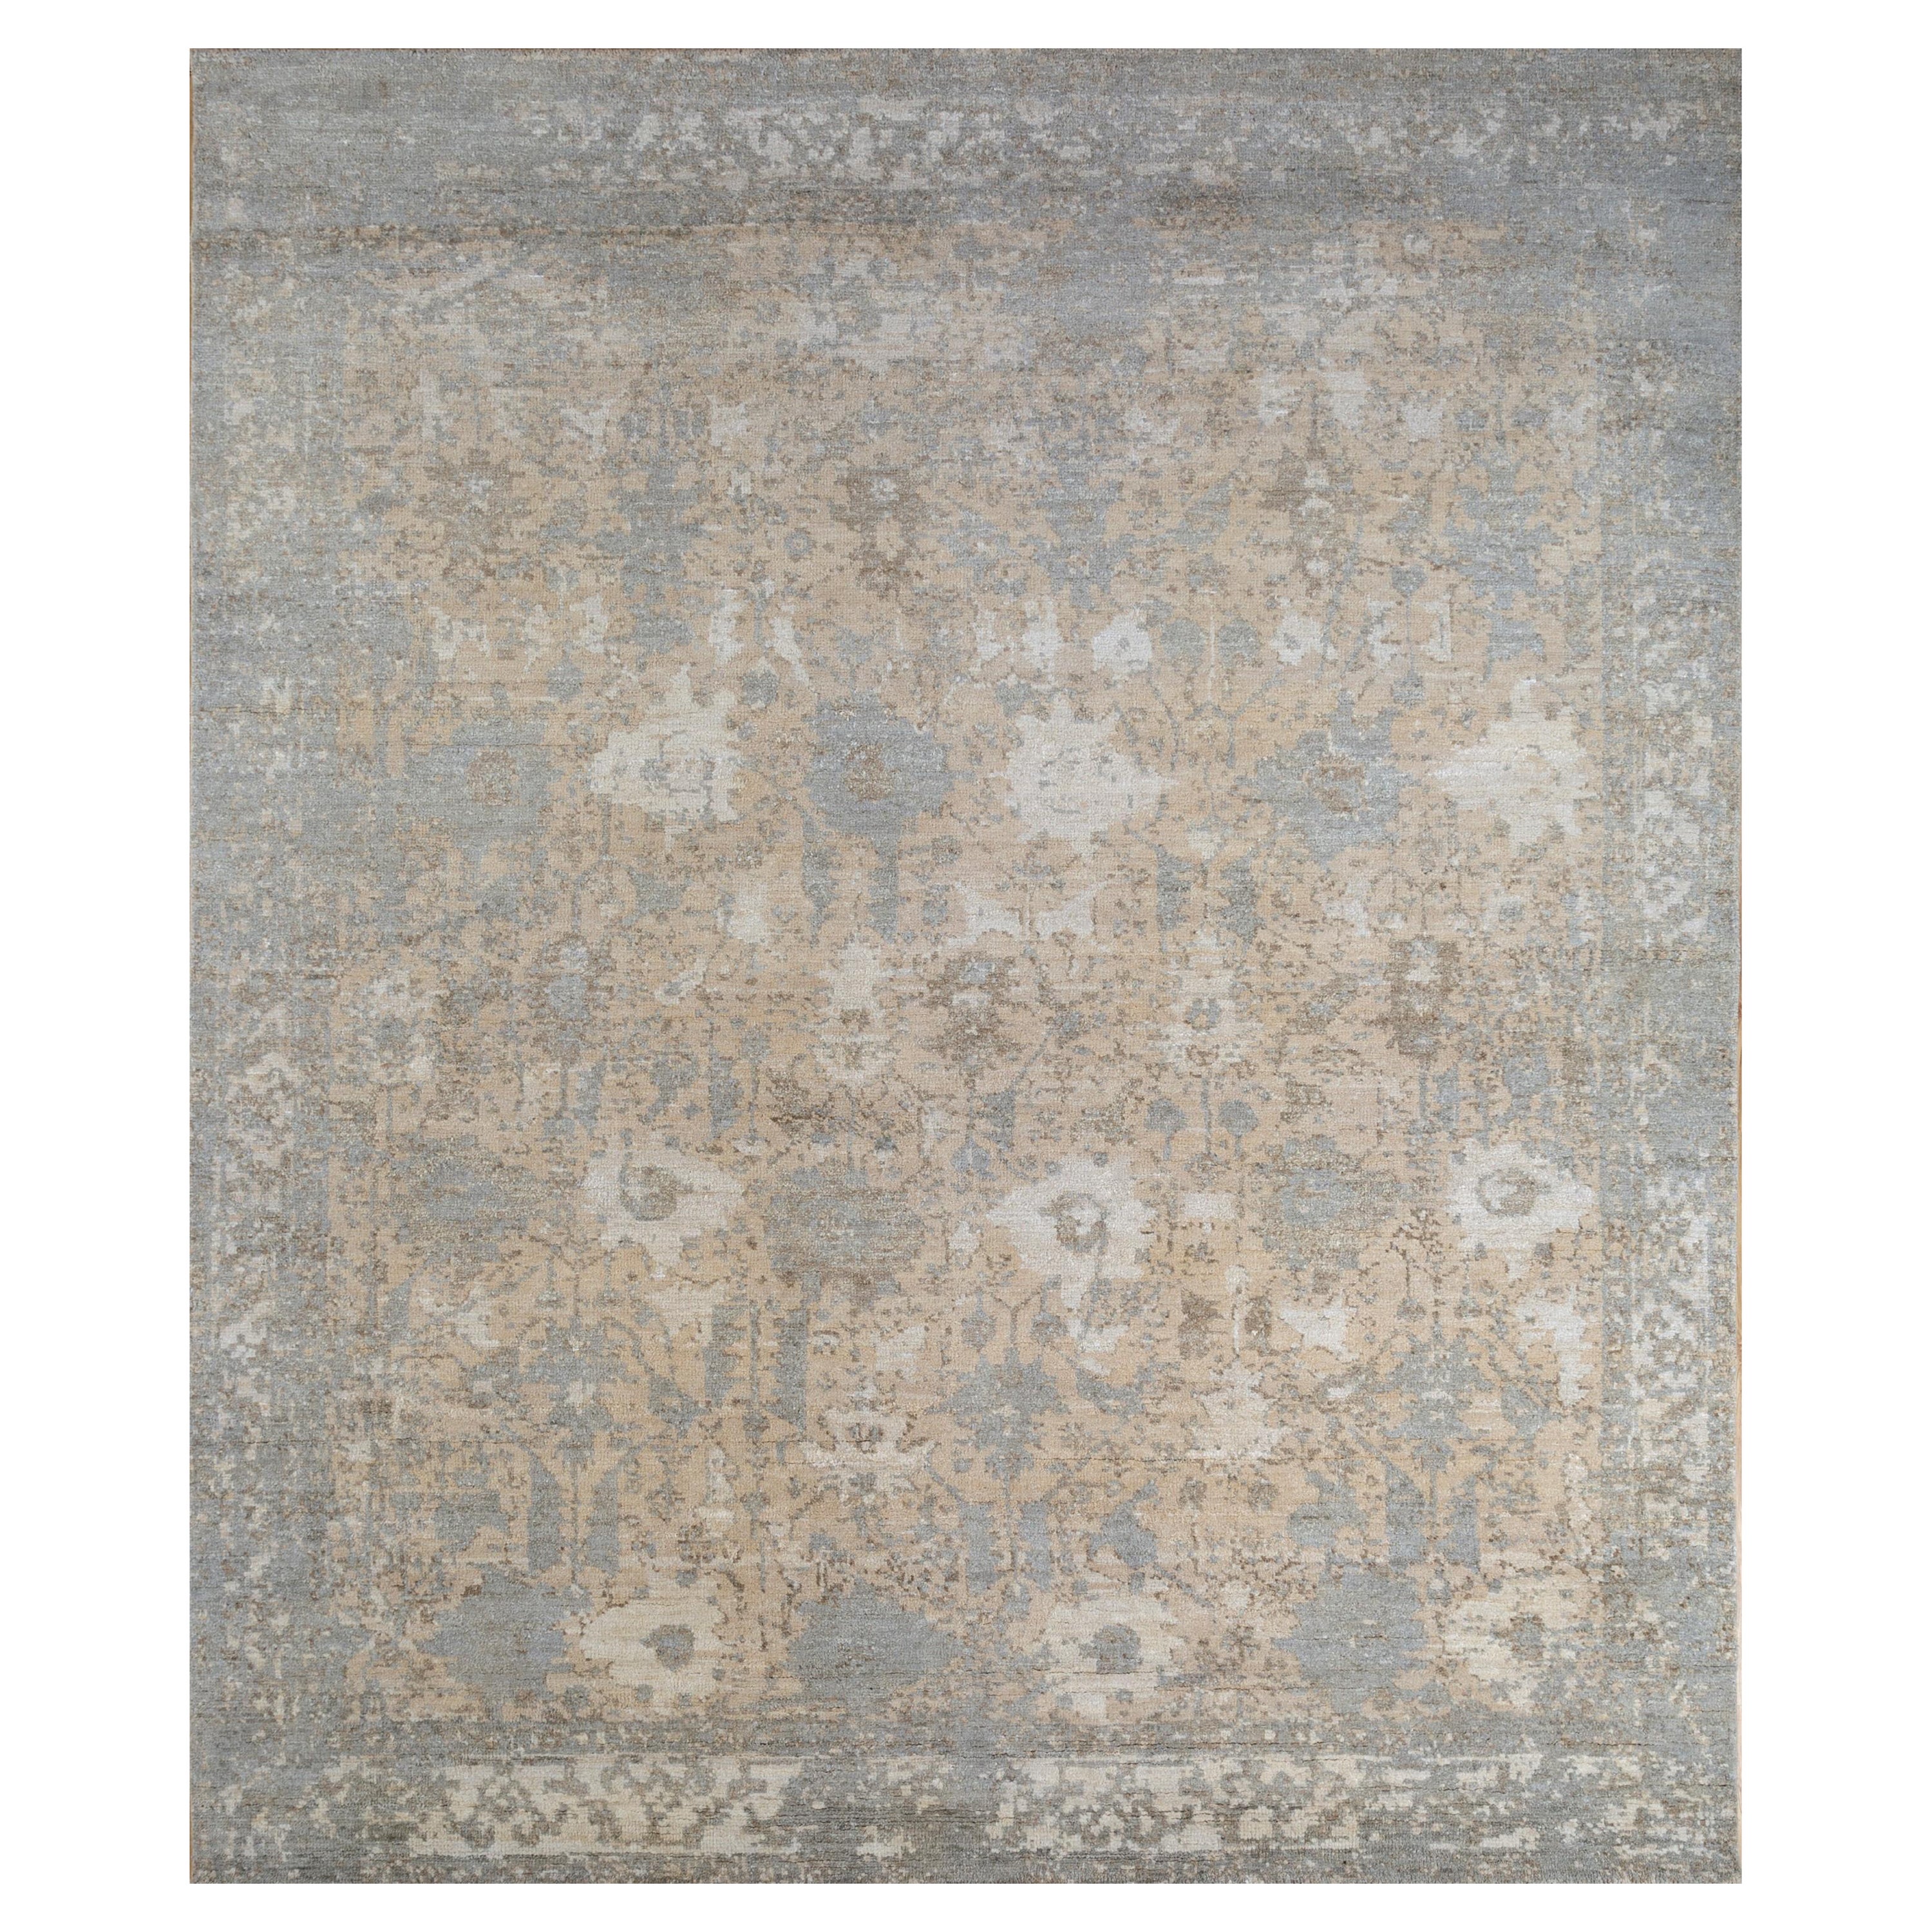 Ethereal Zephyr Antique White & Antique White 240x300 cm Hand Knotted Rug